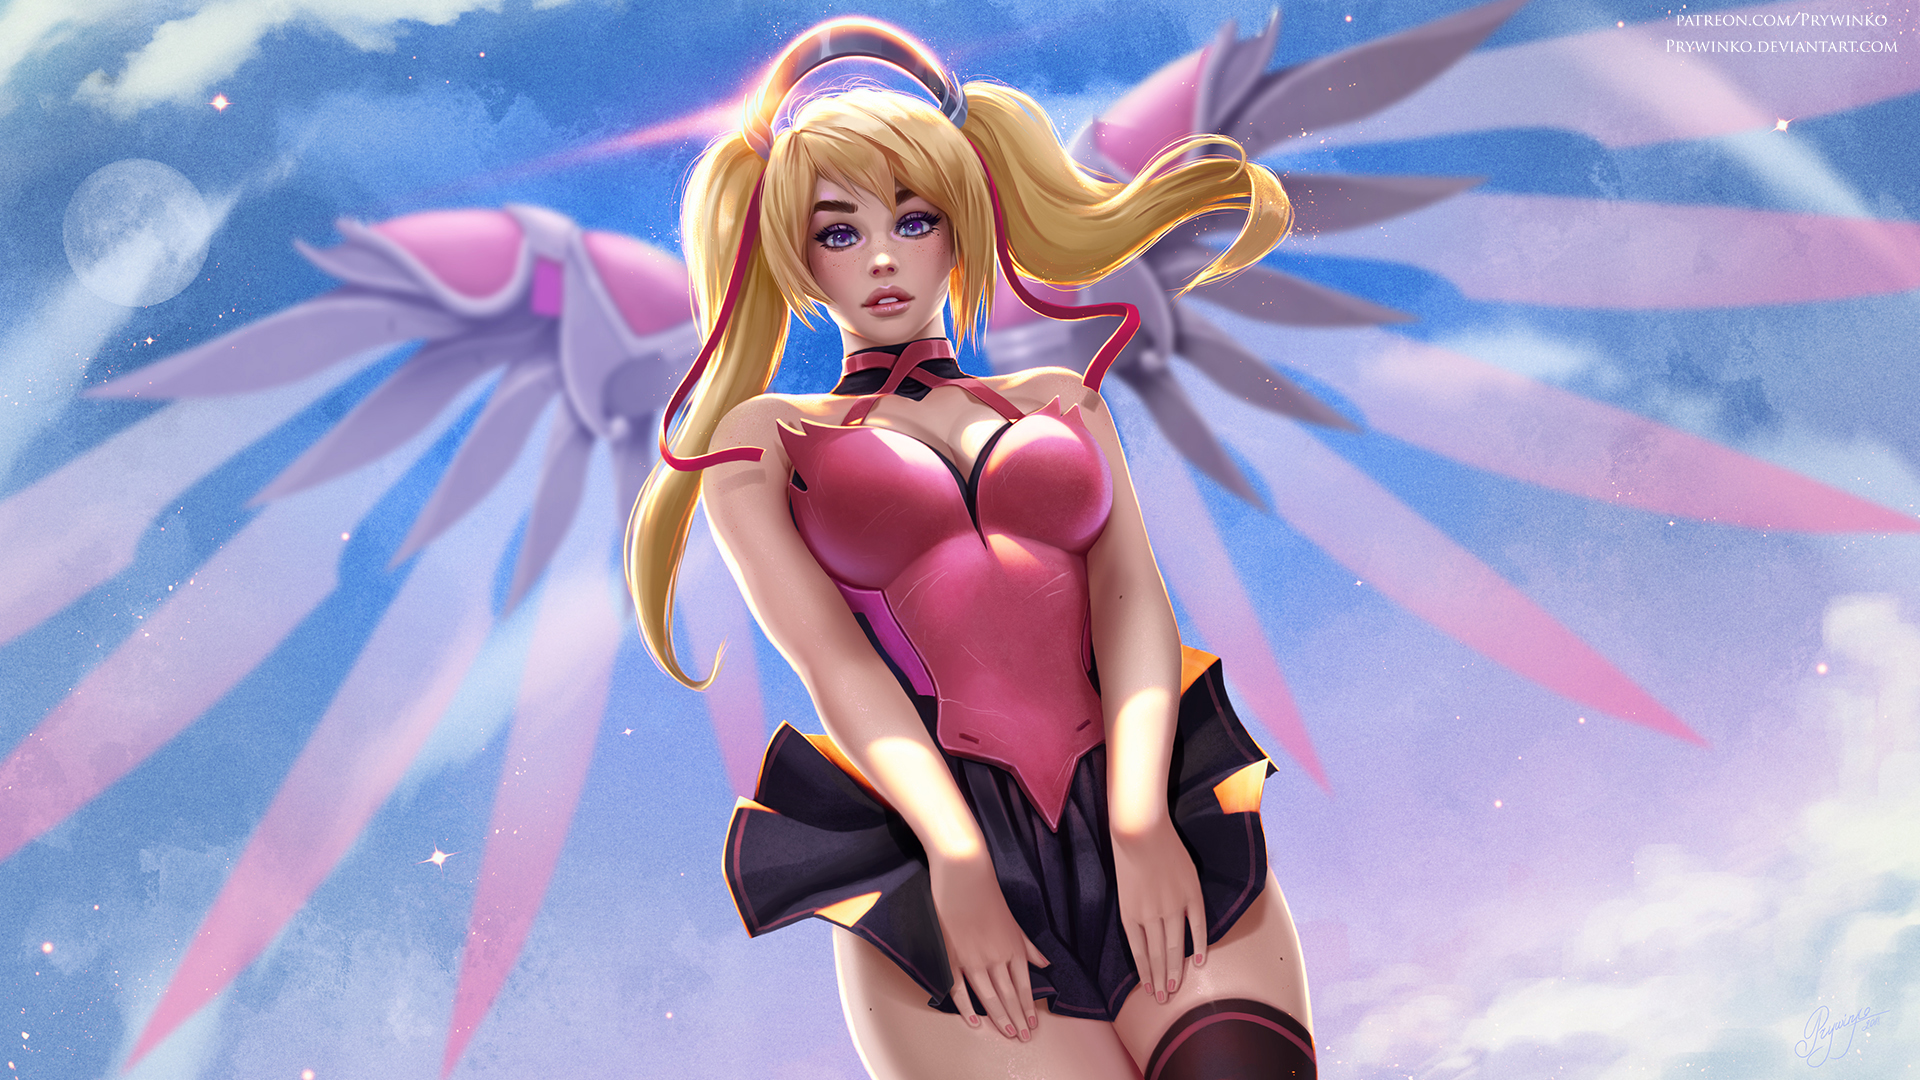 General 1920x1080 Mercy (Overwatch) Overwatch video games video game characters video game girls fan art blonde twintails freckles looking at viewer dress thigh-highs sky wings fantasy girl artwork digital art drawing Prywinko anime